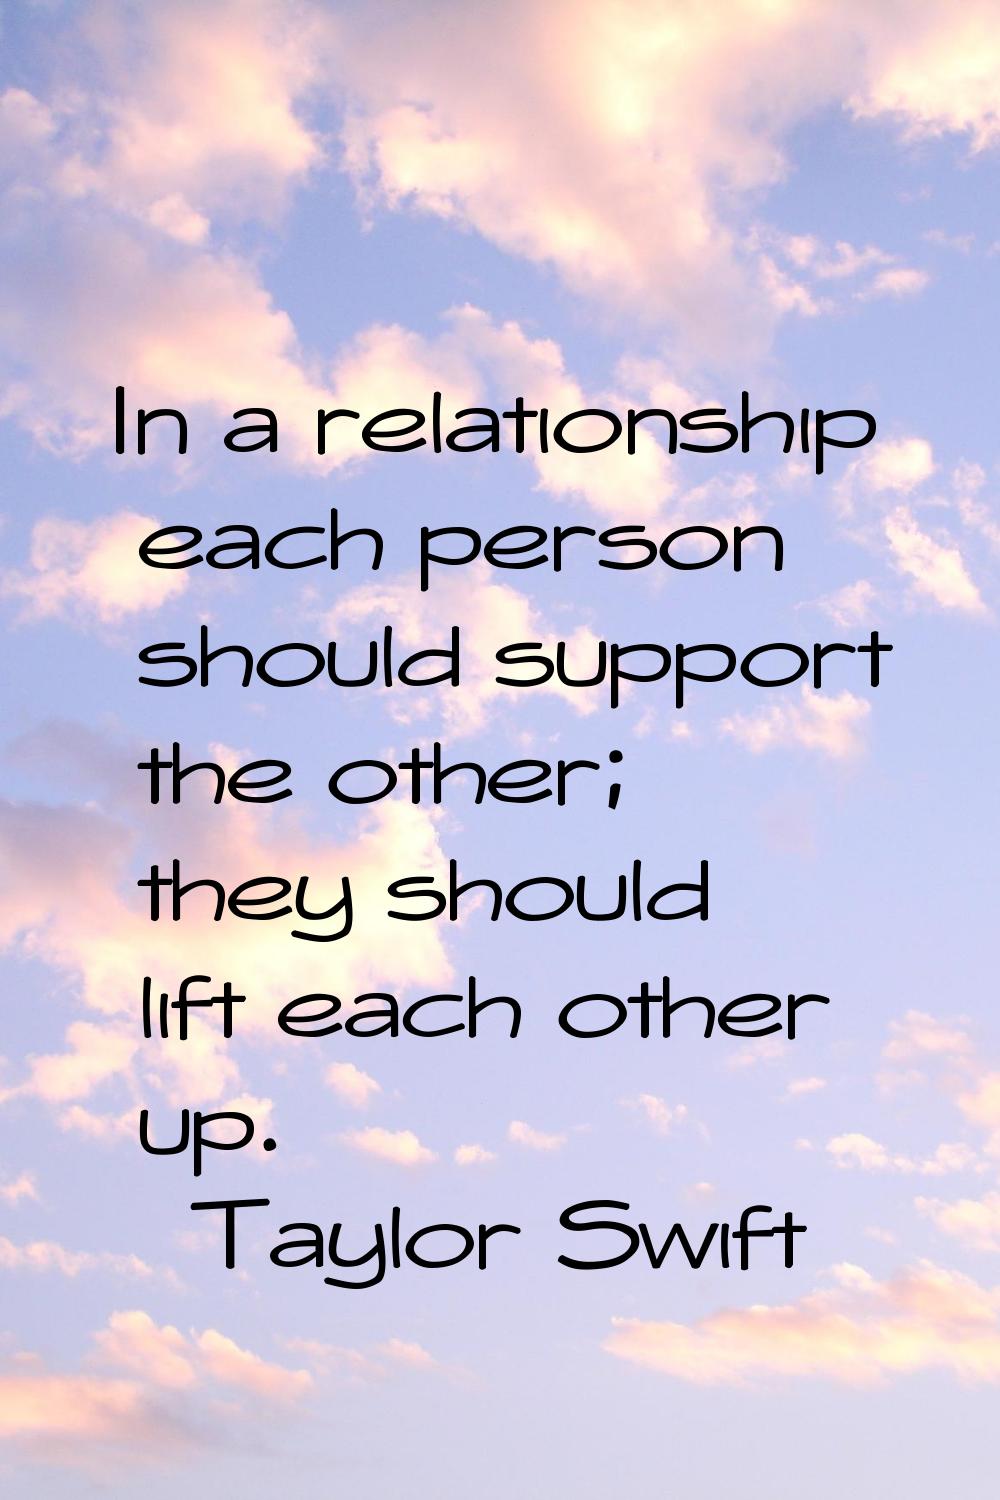 In a relationship each person should support the other; they should lift each other up.